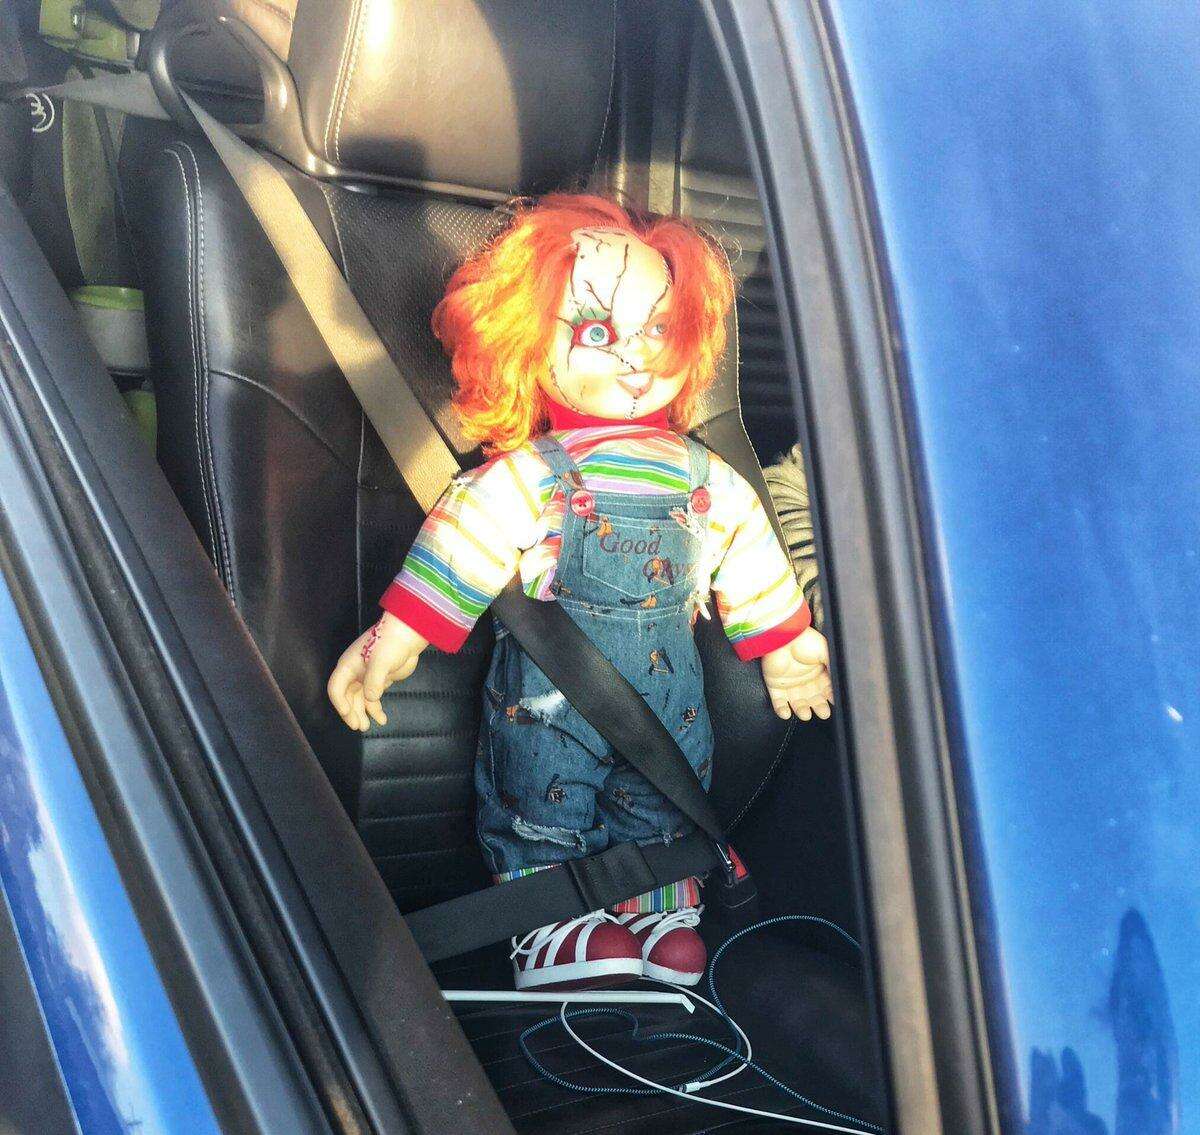 A man tried to use a Chucky Doll as a second passenger to drive in the carpool lane on a highway in Concord, officials said.